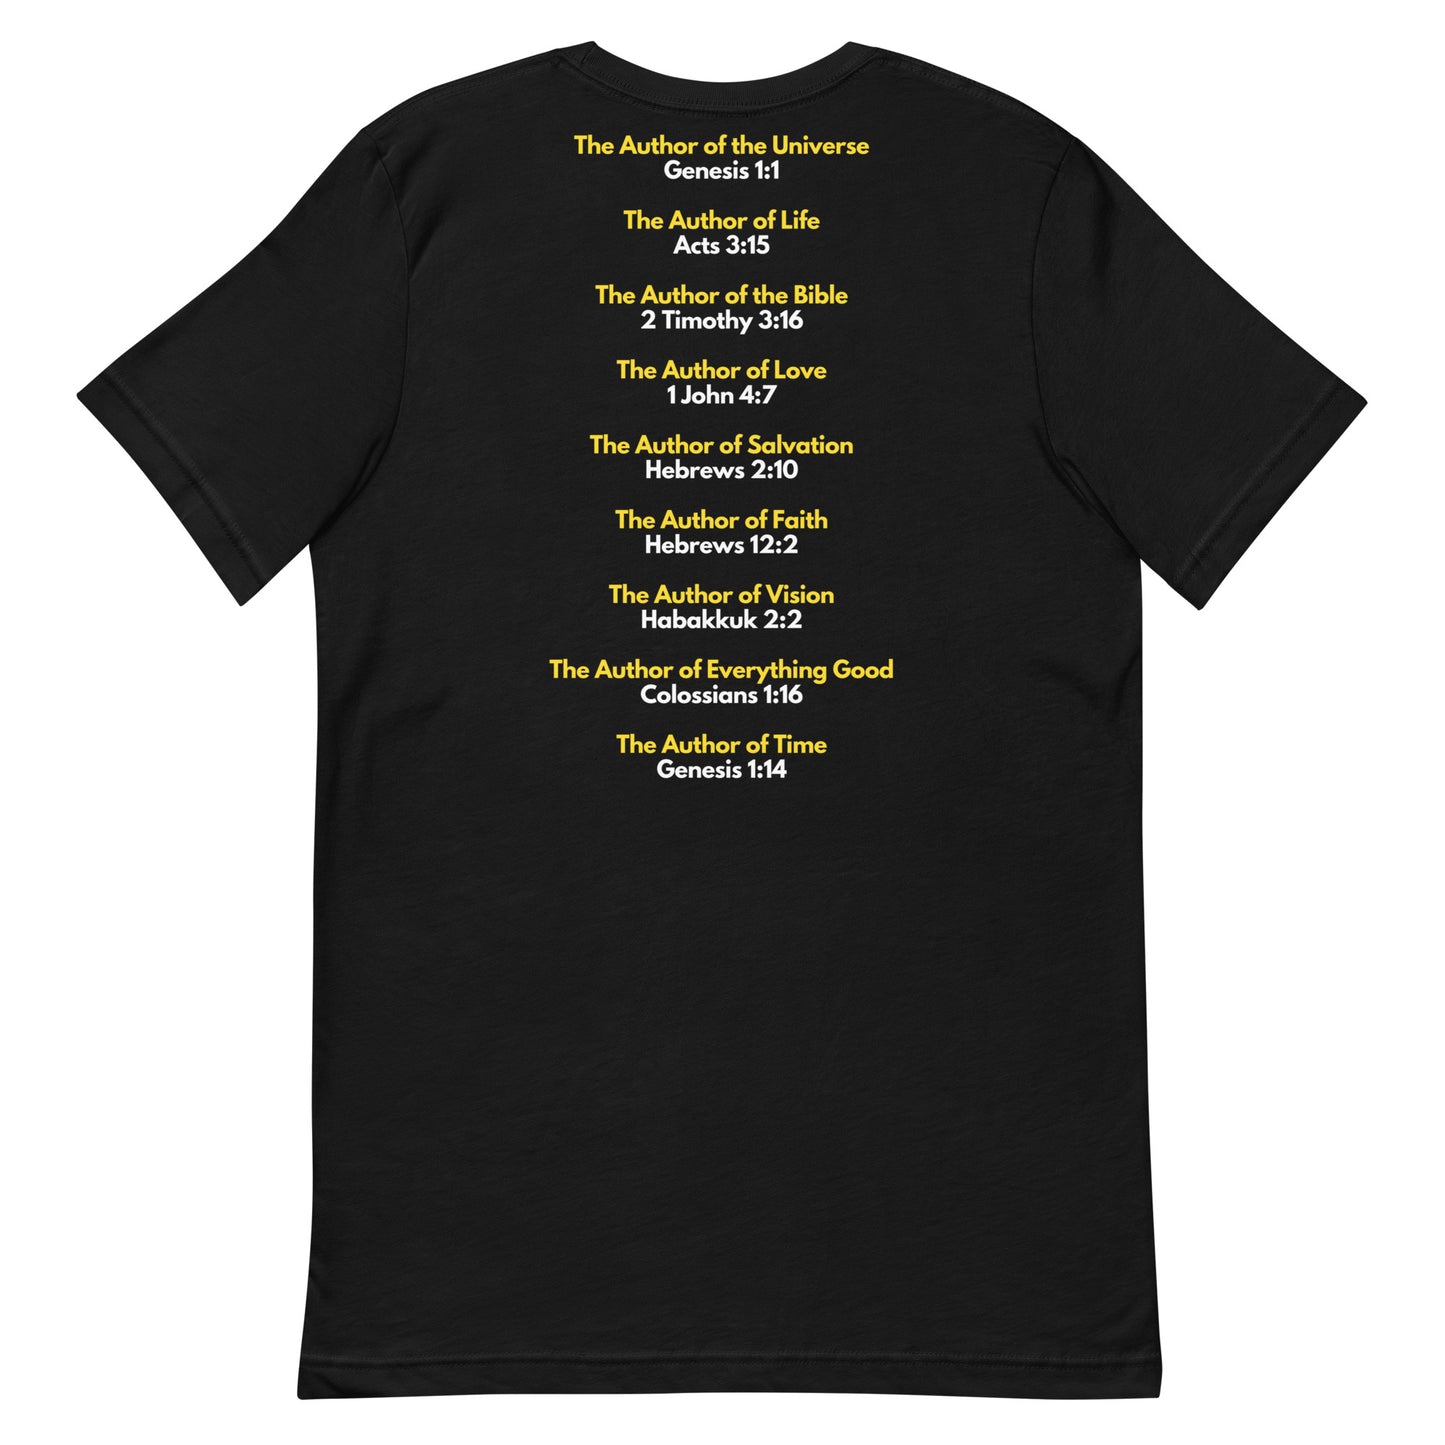 God Is The Author - Women and Teen's Classic T-Shirt